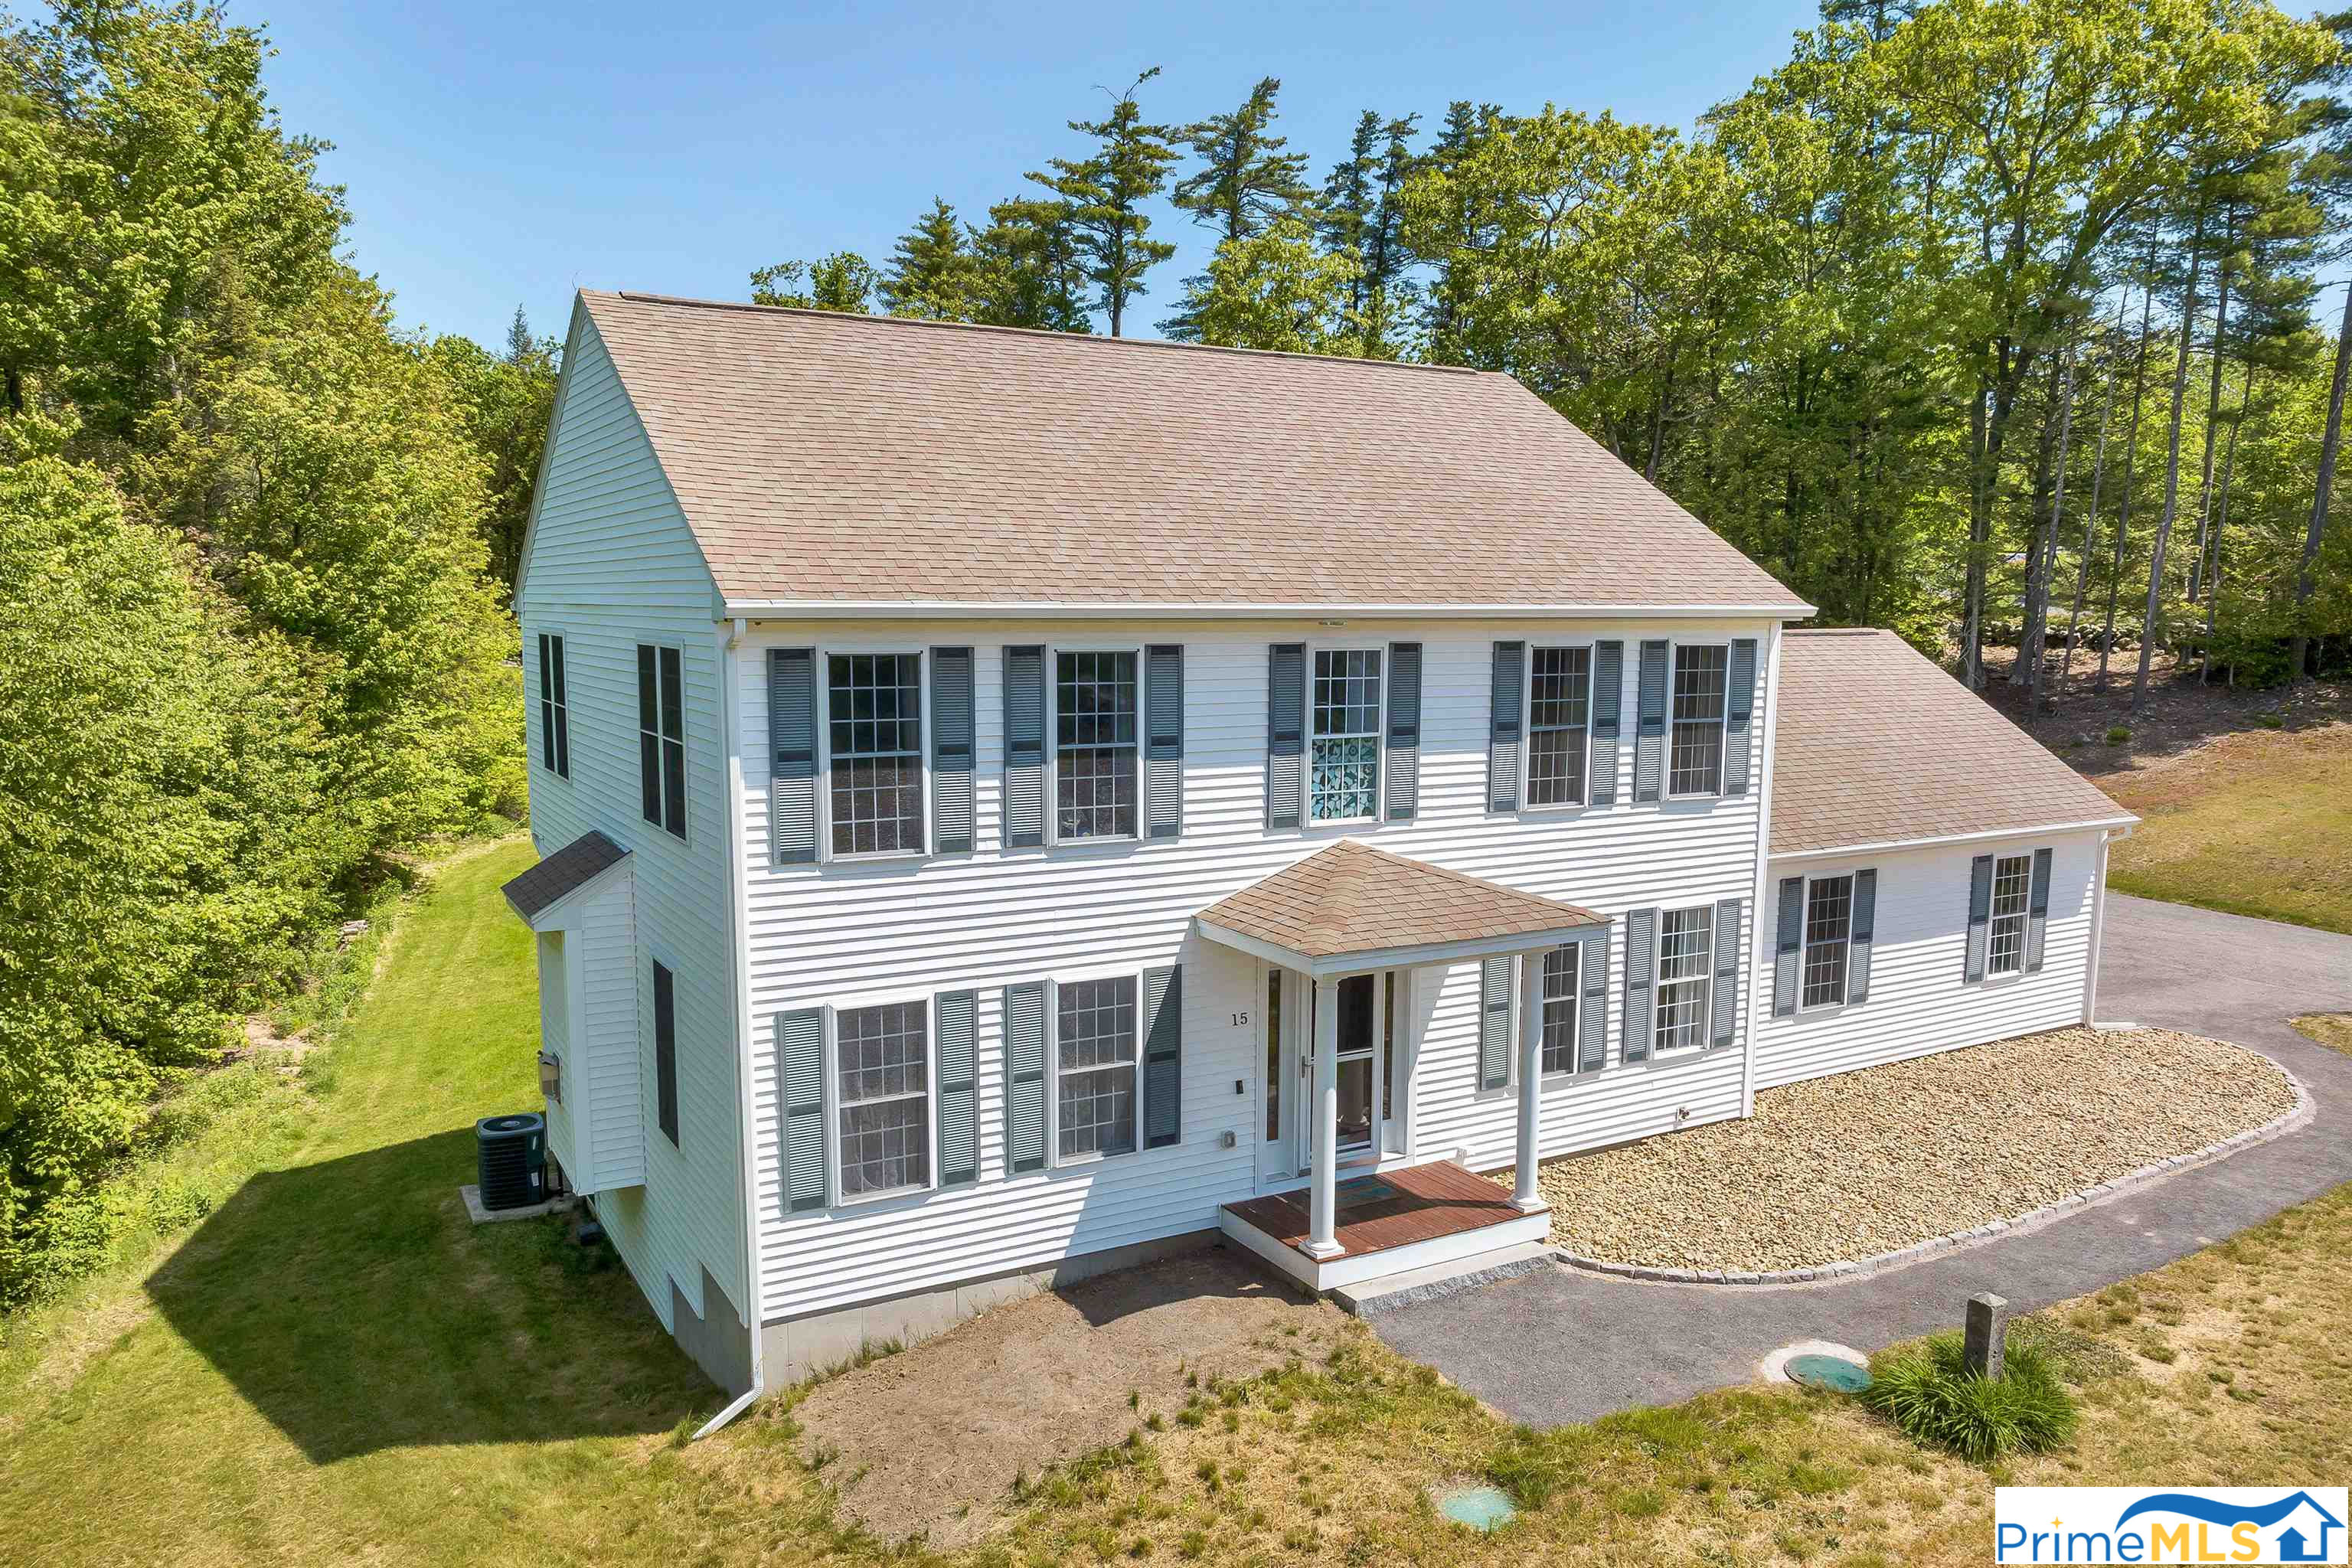 15 Carriage Hill Road, Wilton, NH 03086